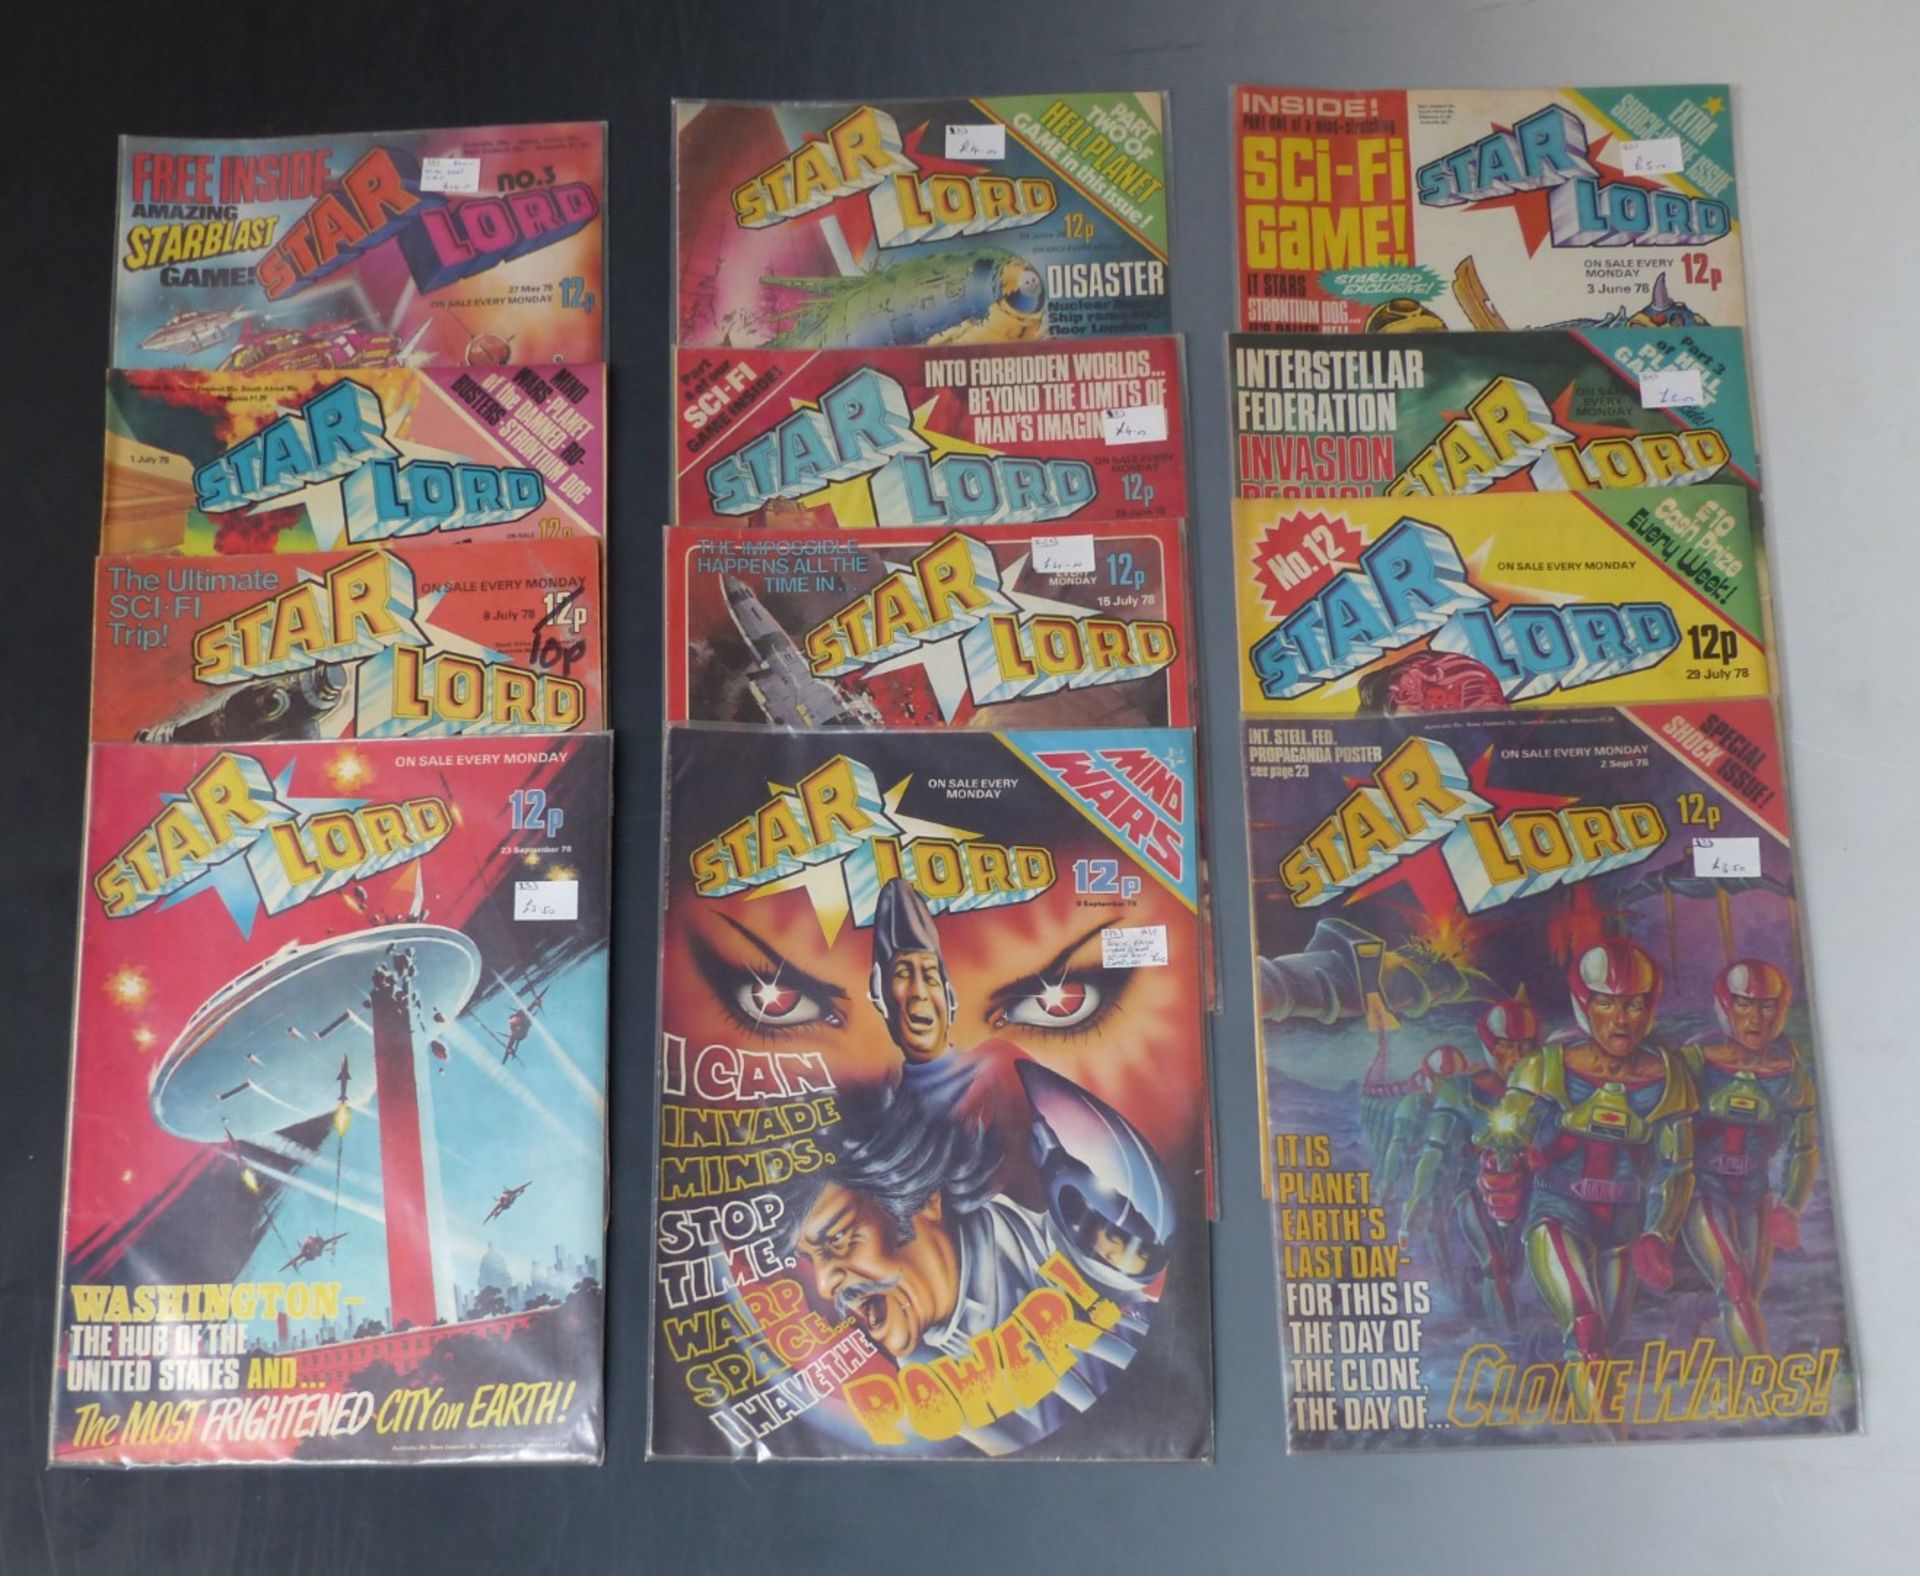 Twelve Star Lord comics dating from 1978, one with free gift.